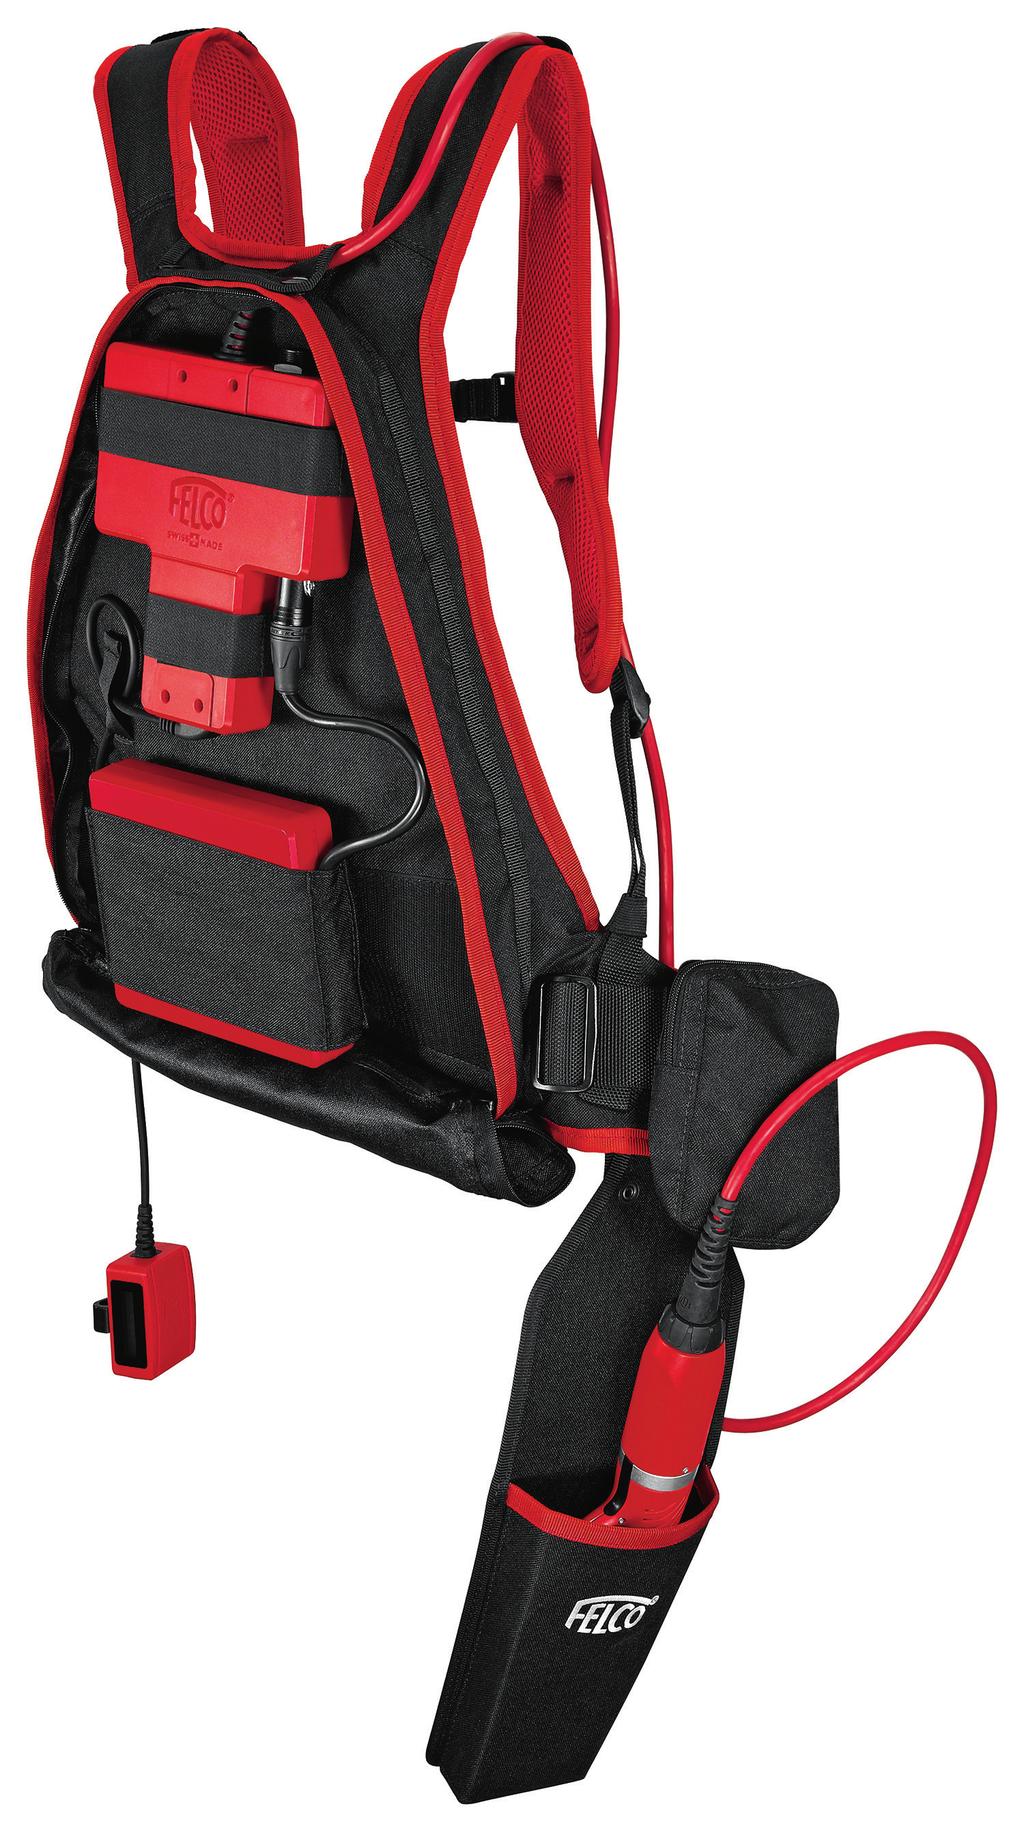 FELCOTRONIC POWERPACK A compact and electroportable set for the FELCO 801 and FELCO 820 to include the harness, battery, control housing and remote housing.